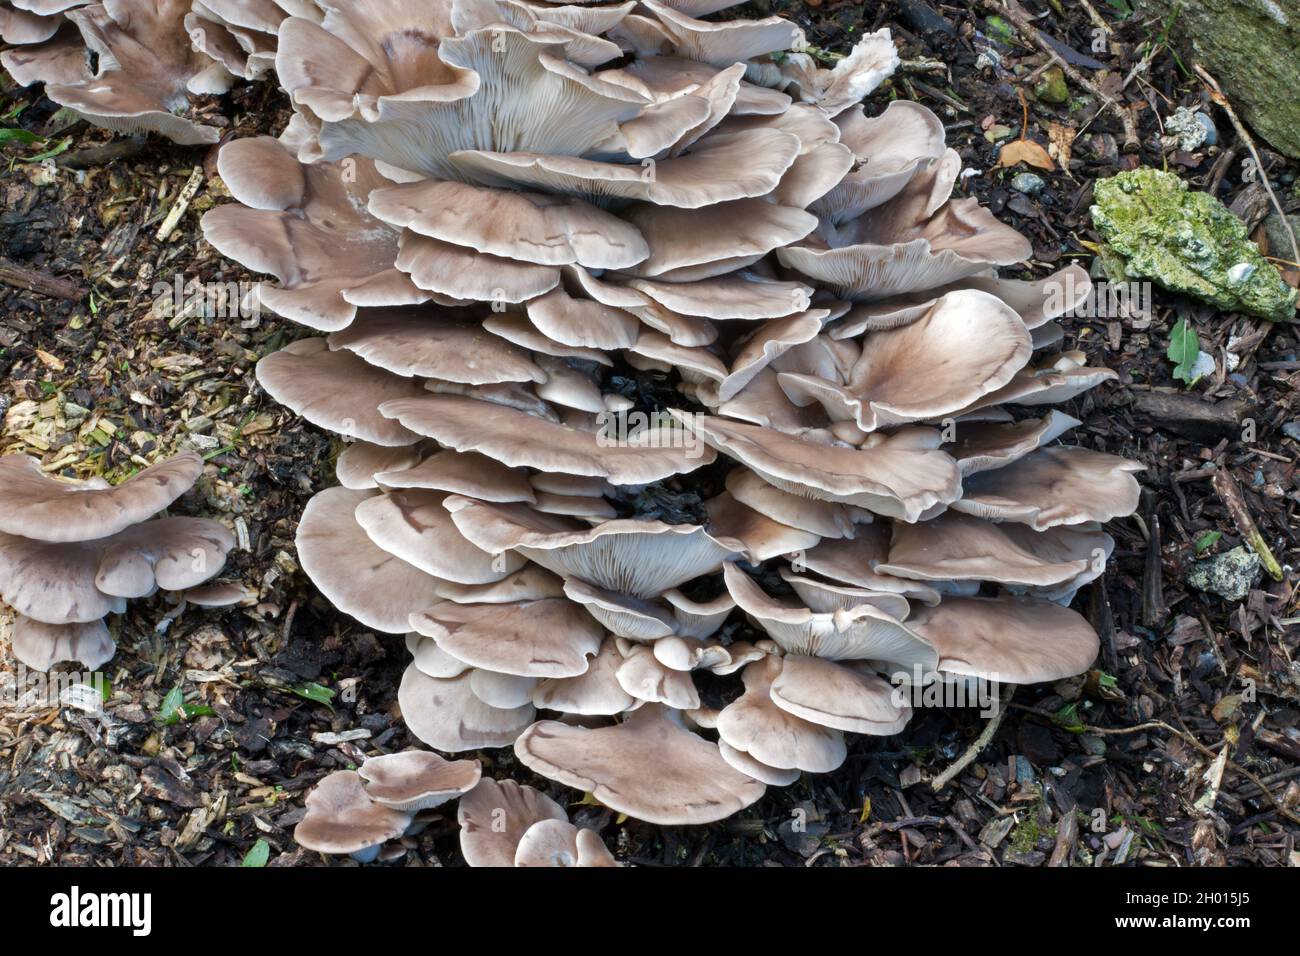 The edible fungus Pleurotus ostreatus (oyster mushroom) is widespread in many temperate and subtropical forests throughout the world. Stock Photo